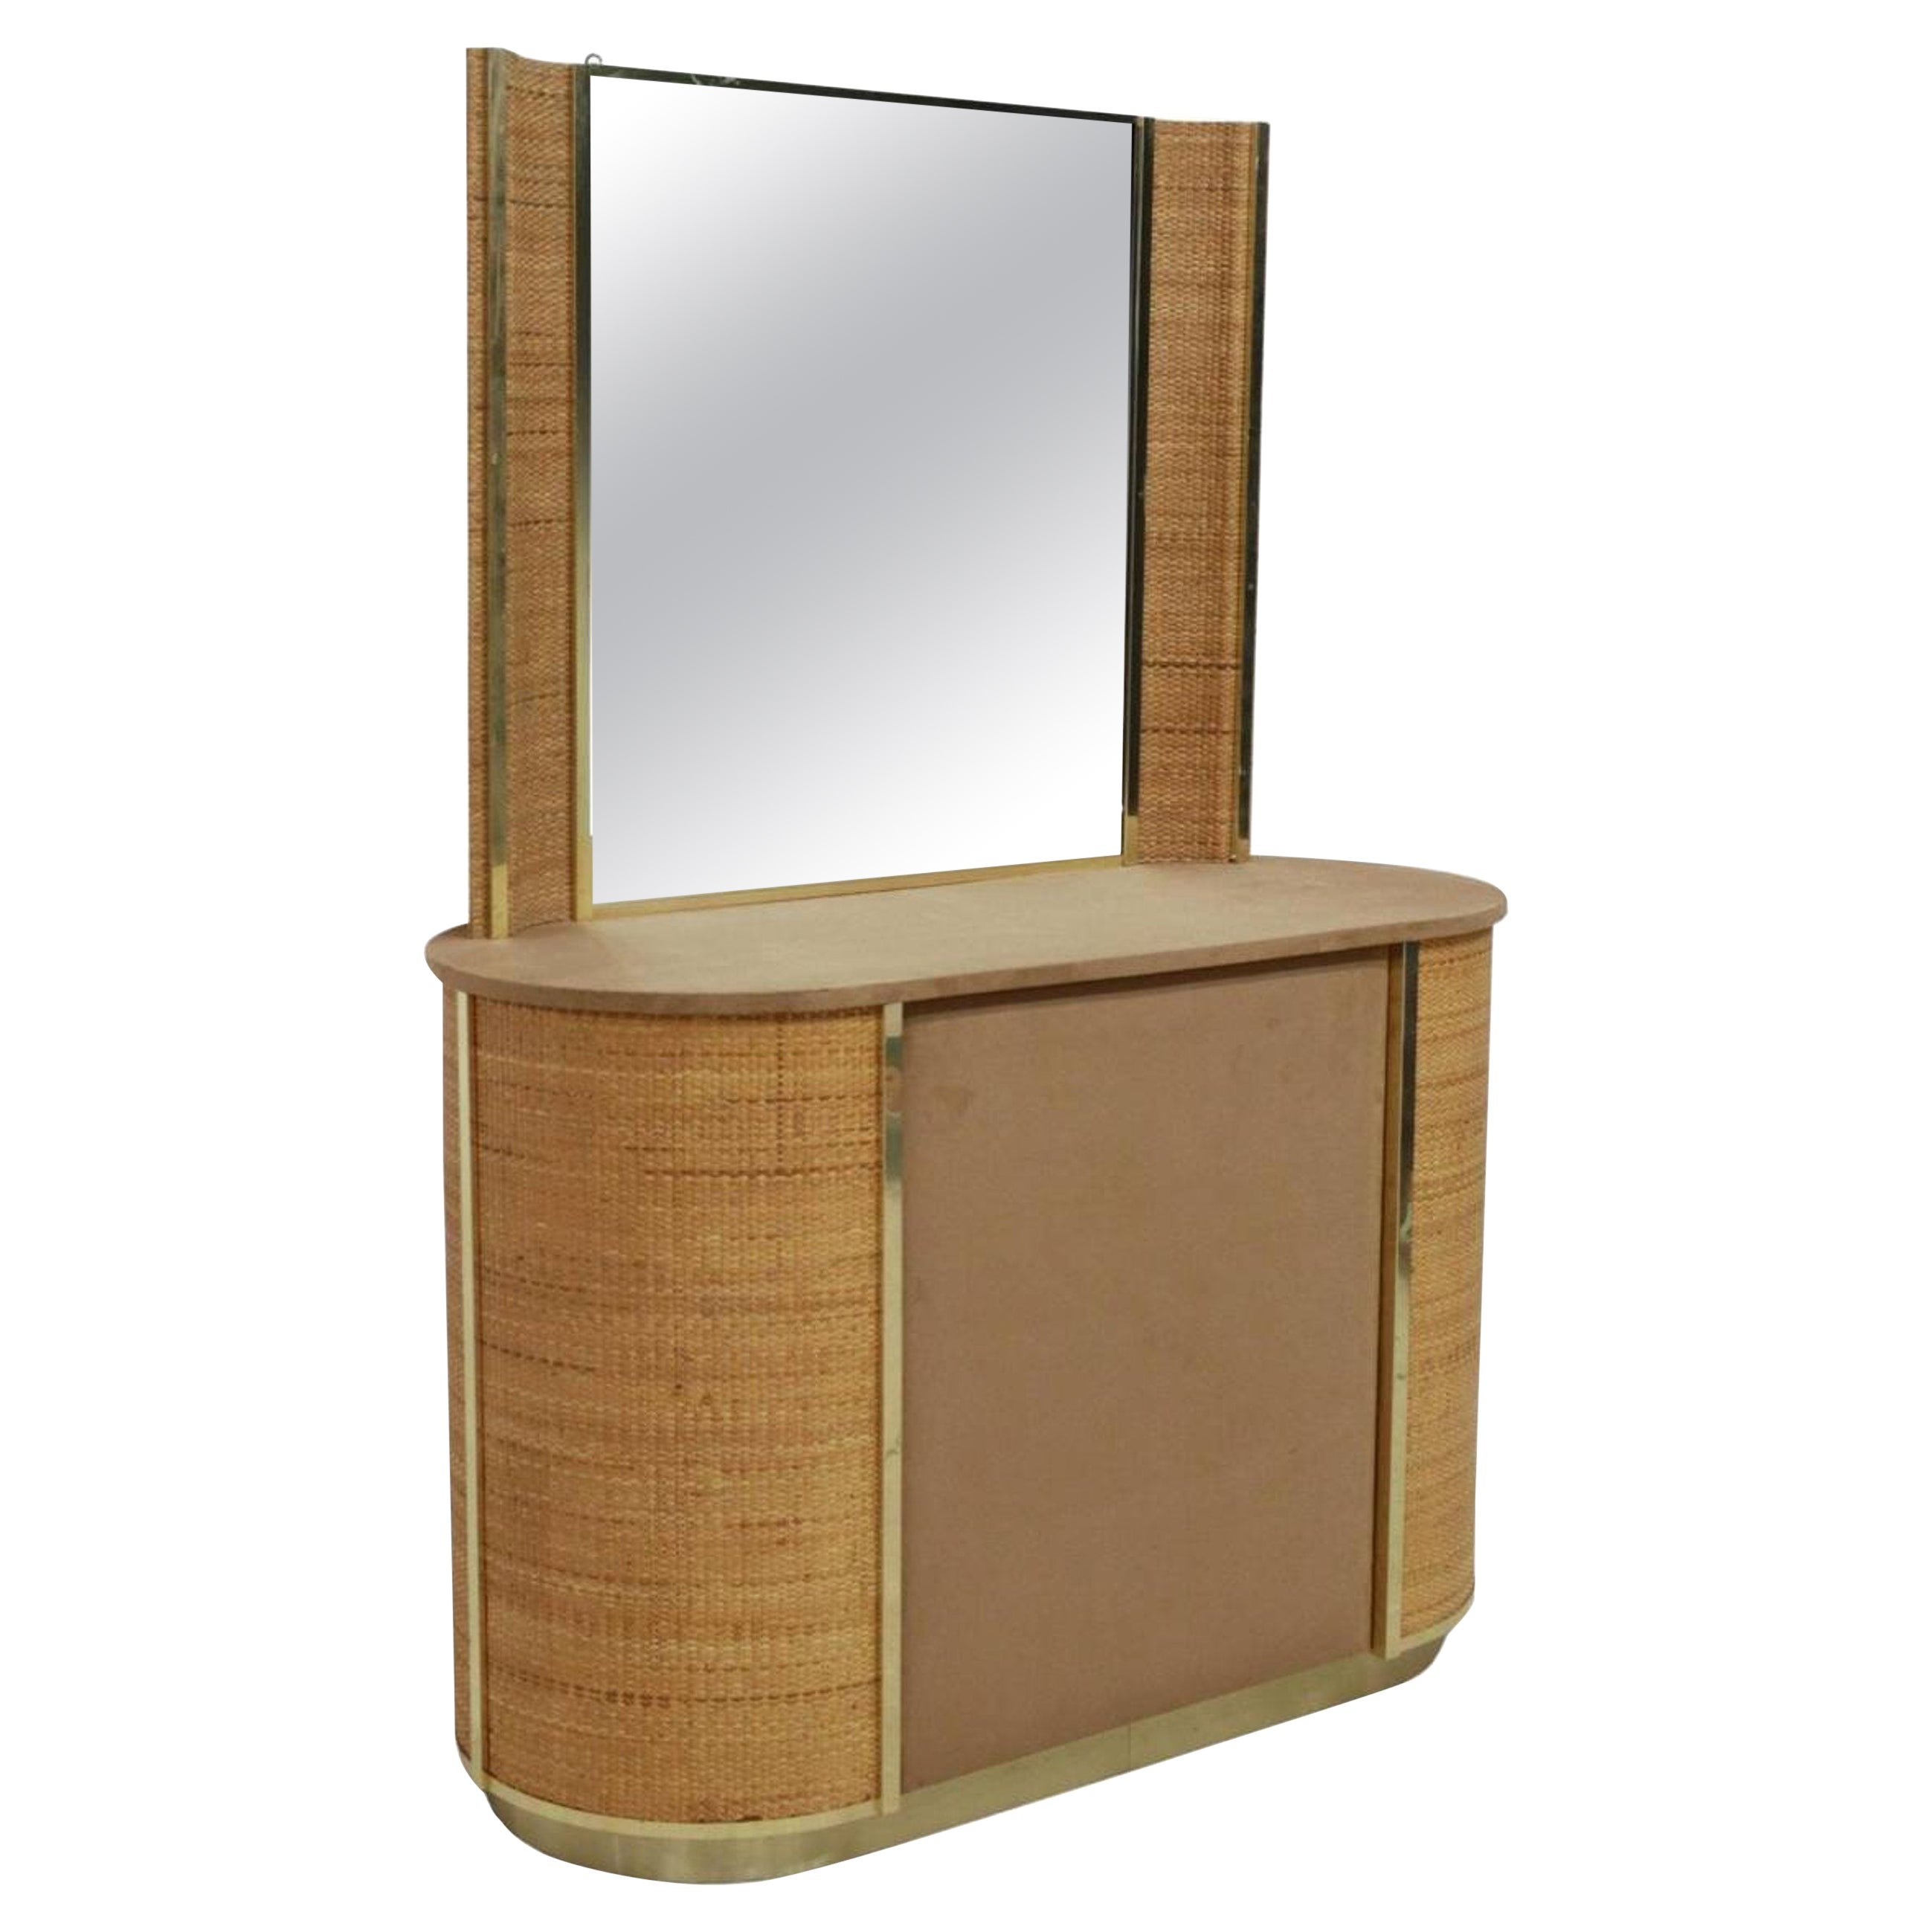 1970s Modern Console Vanity with Mirror